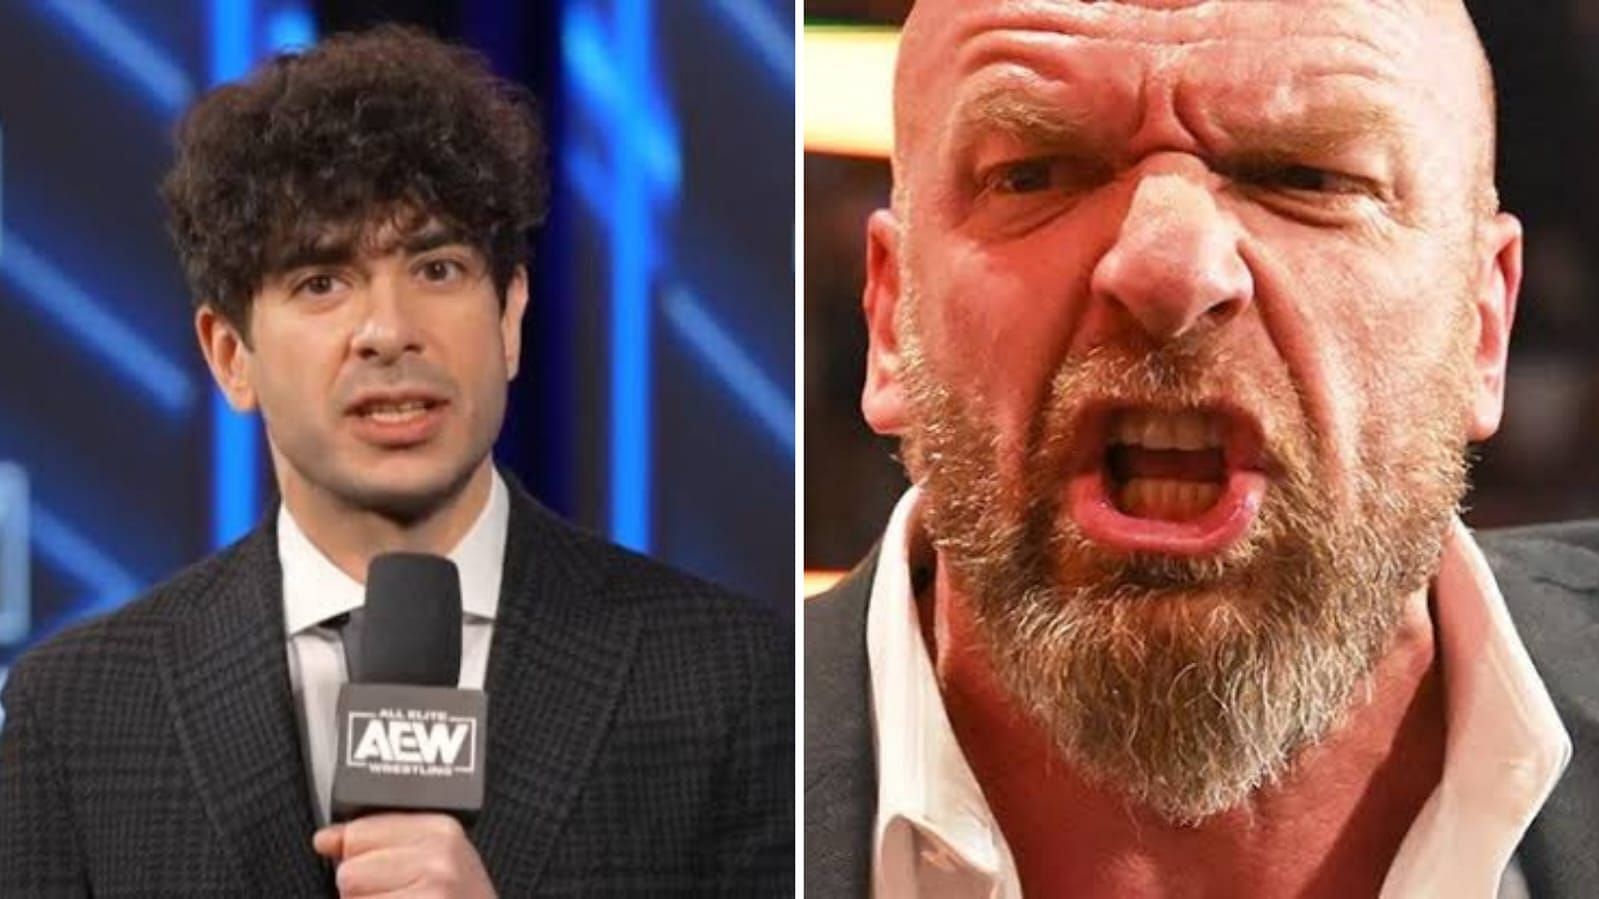 Tony Khan and Triple H are two of wrestling